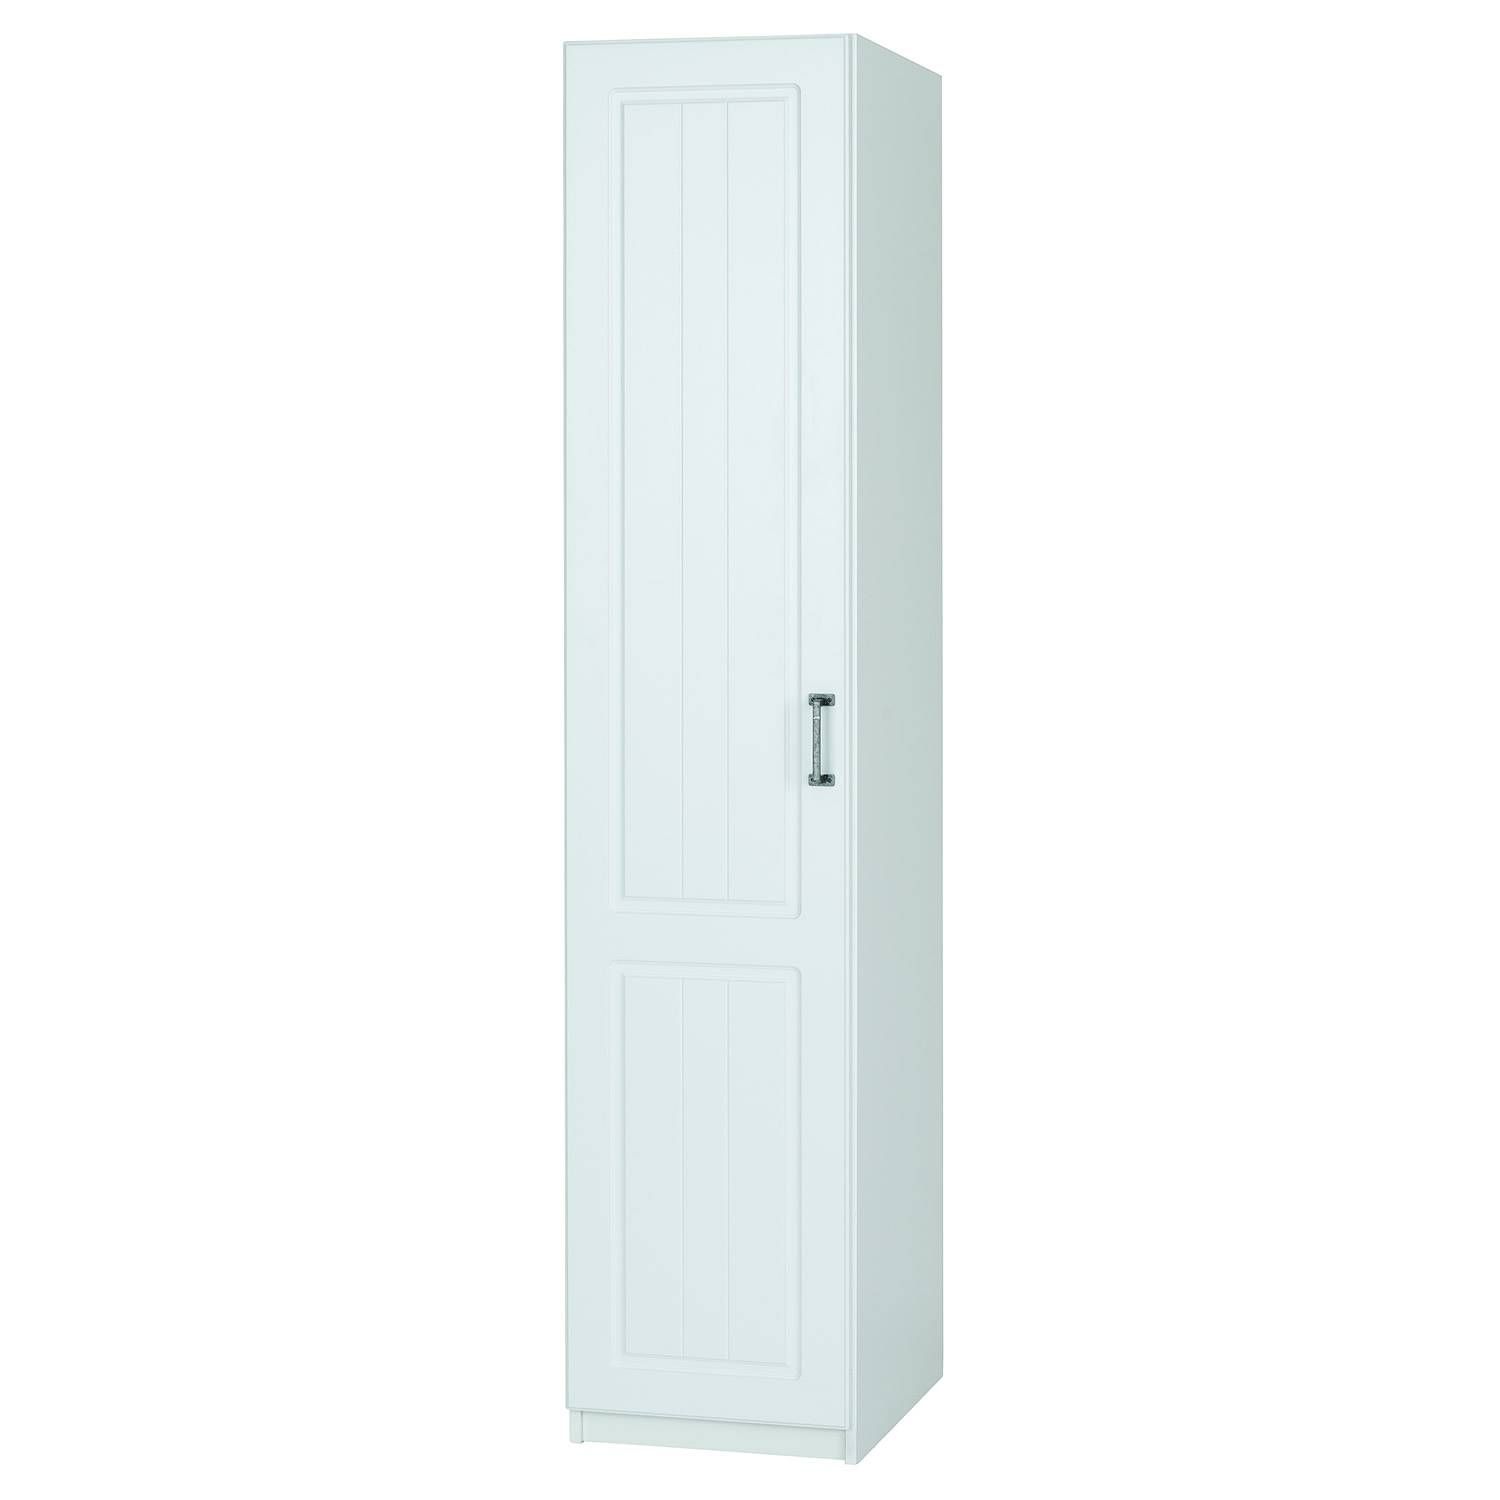 Wardrobes For Small Bedrooms Throughout Small Single Wardrobes (View 5 of 15)